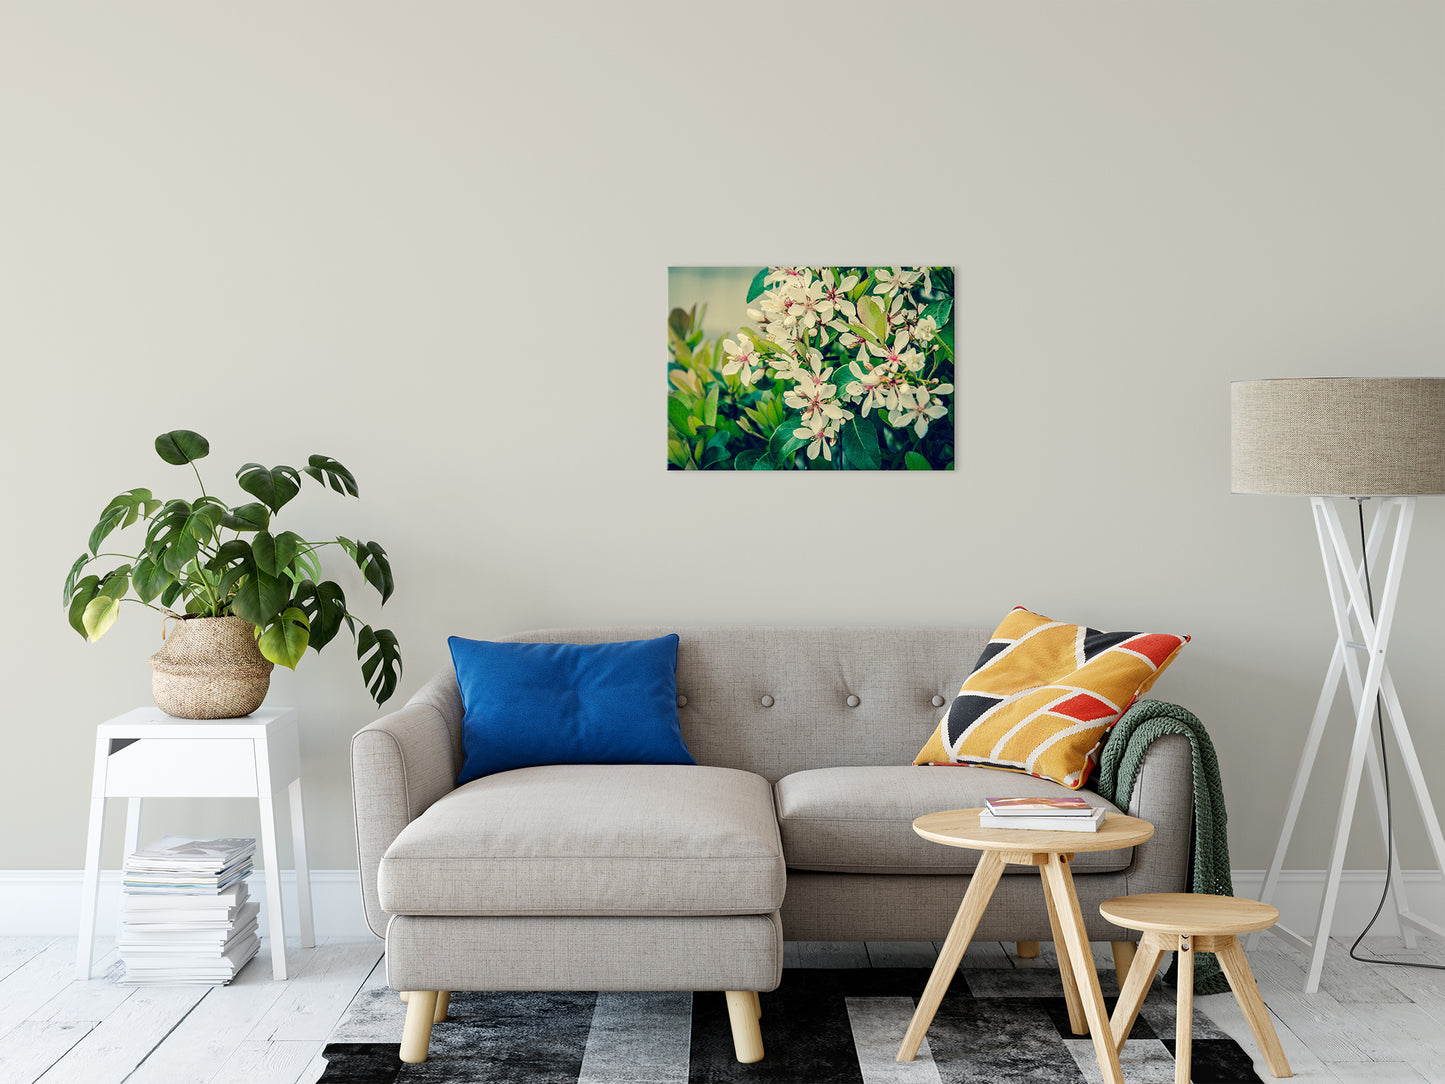 Indian Hawthorn Shrub in Bloom Colorized Floral Photo Fine Art Canvas Wall Art Prints 20" x 30" - PIPAFINEART